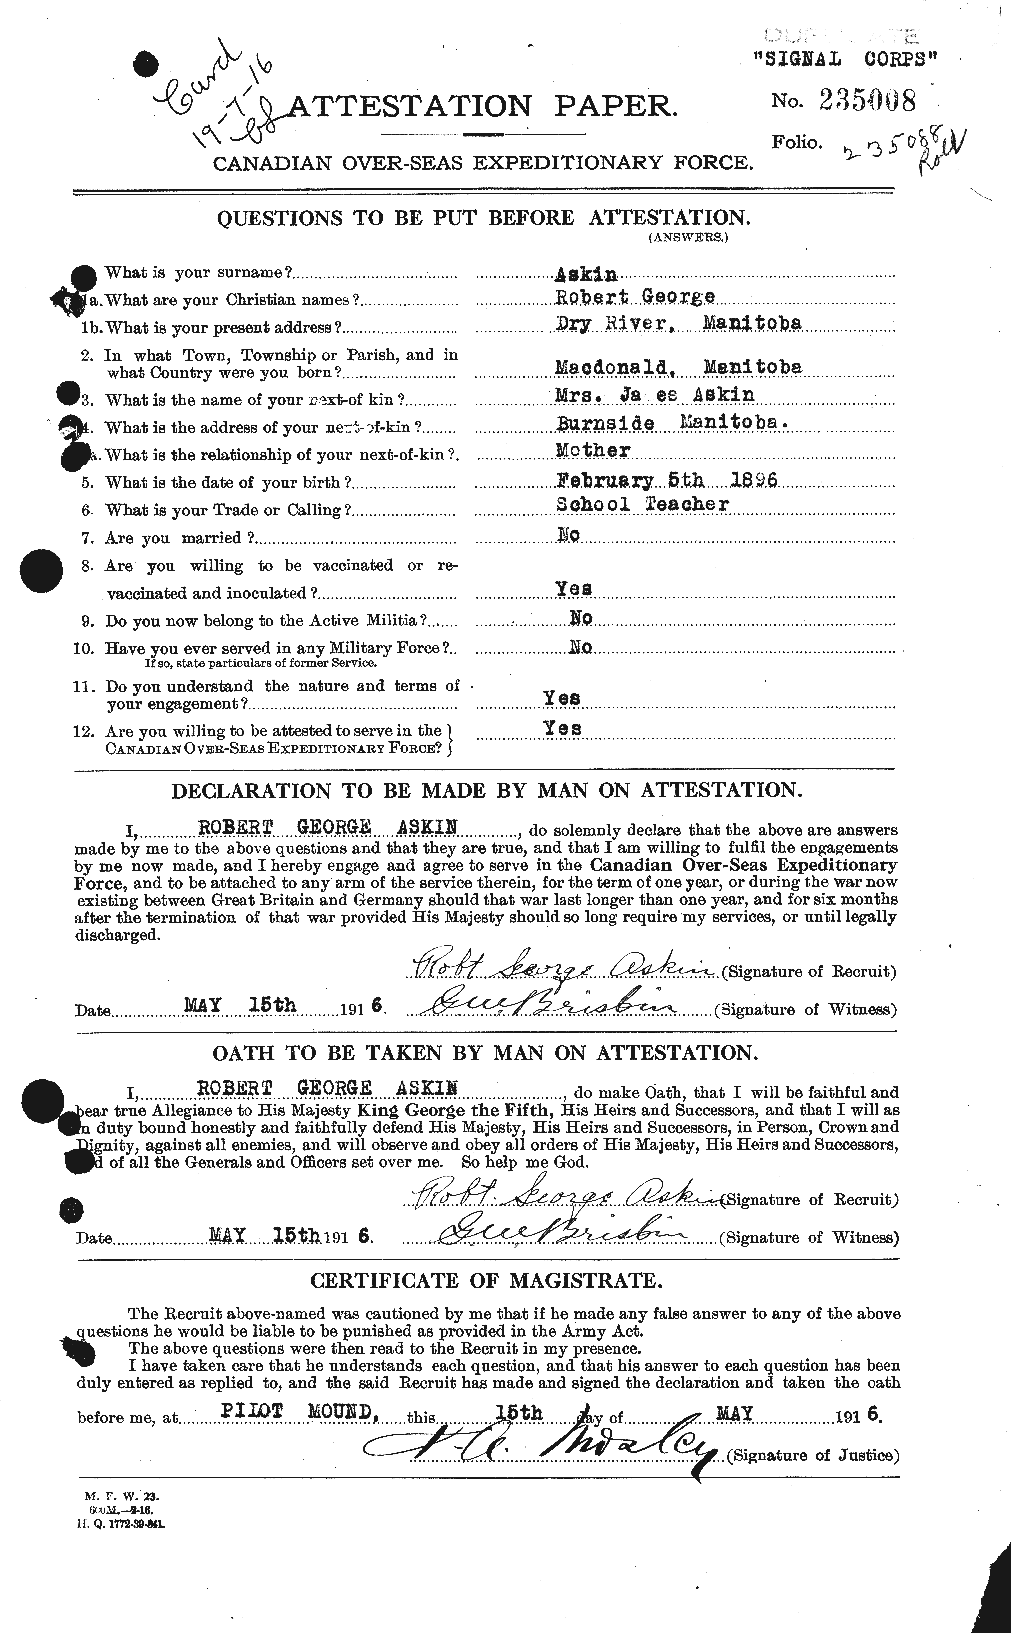 Personnel Records of the First World War - CEF 223646a